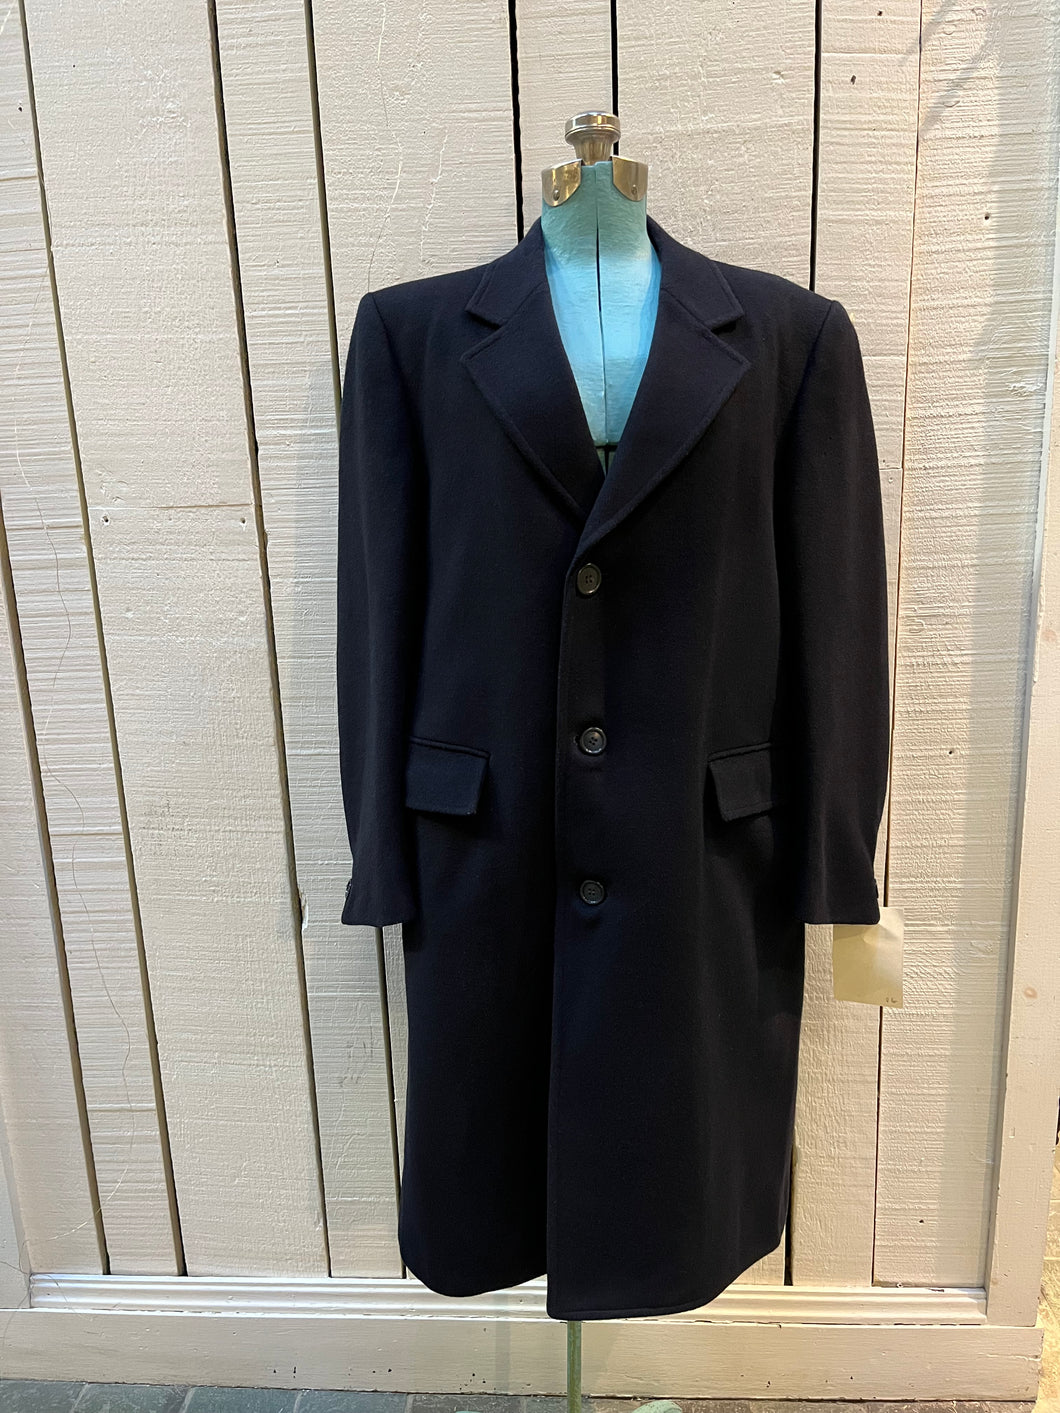 Vintage Leishman grey wool blend (70% wool/ cashmere 15%/ nylon coat with button closures, two front flap pockets and two inside pockets.

Size 40